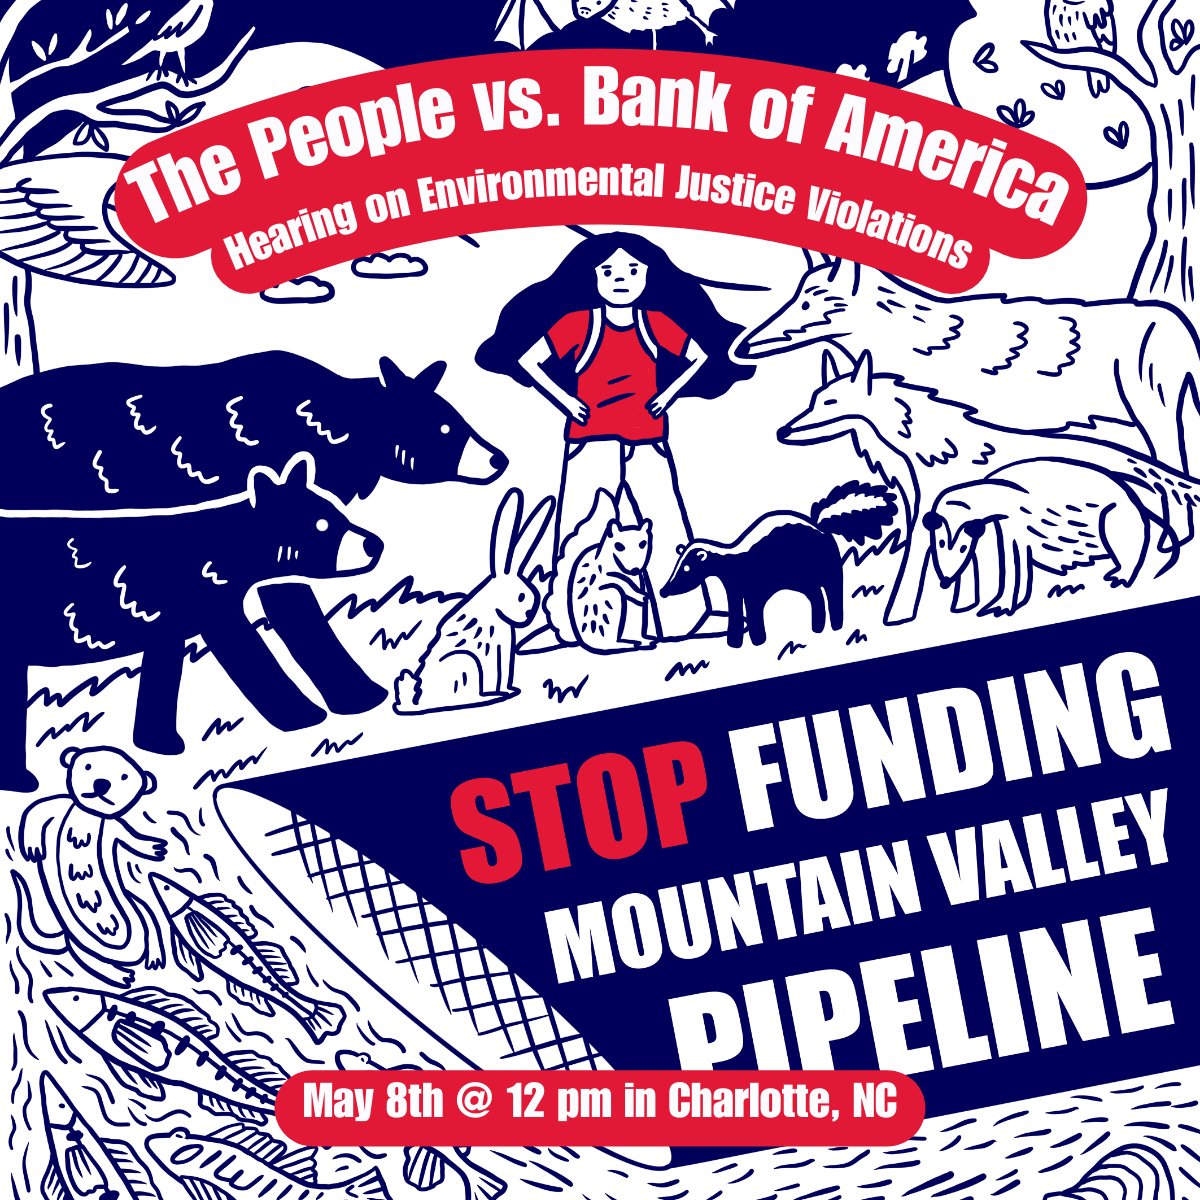 Charlotte, NC — @BankofAmerica has been funding climate chaos for too long! We're traveling to their HQ to send them a clear message: stop backing the Mountain Valley Pipeline and all fossil fuel projects NOW! 

Join us May 8: powhr.org/event/the-peop…

#StopMVP #DefundClimateChaos